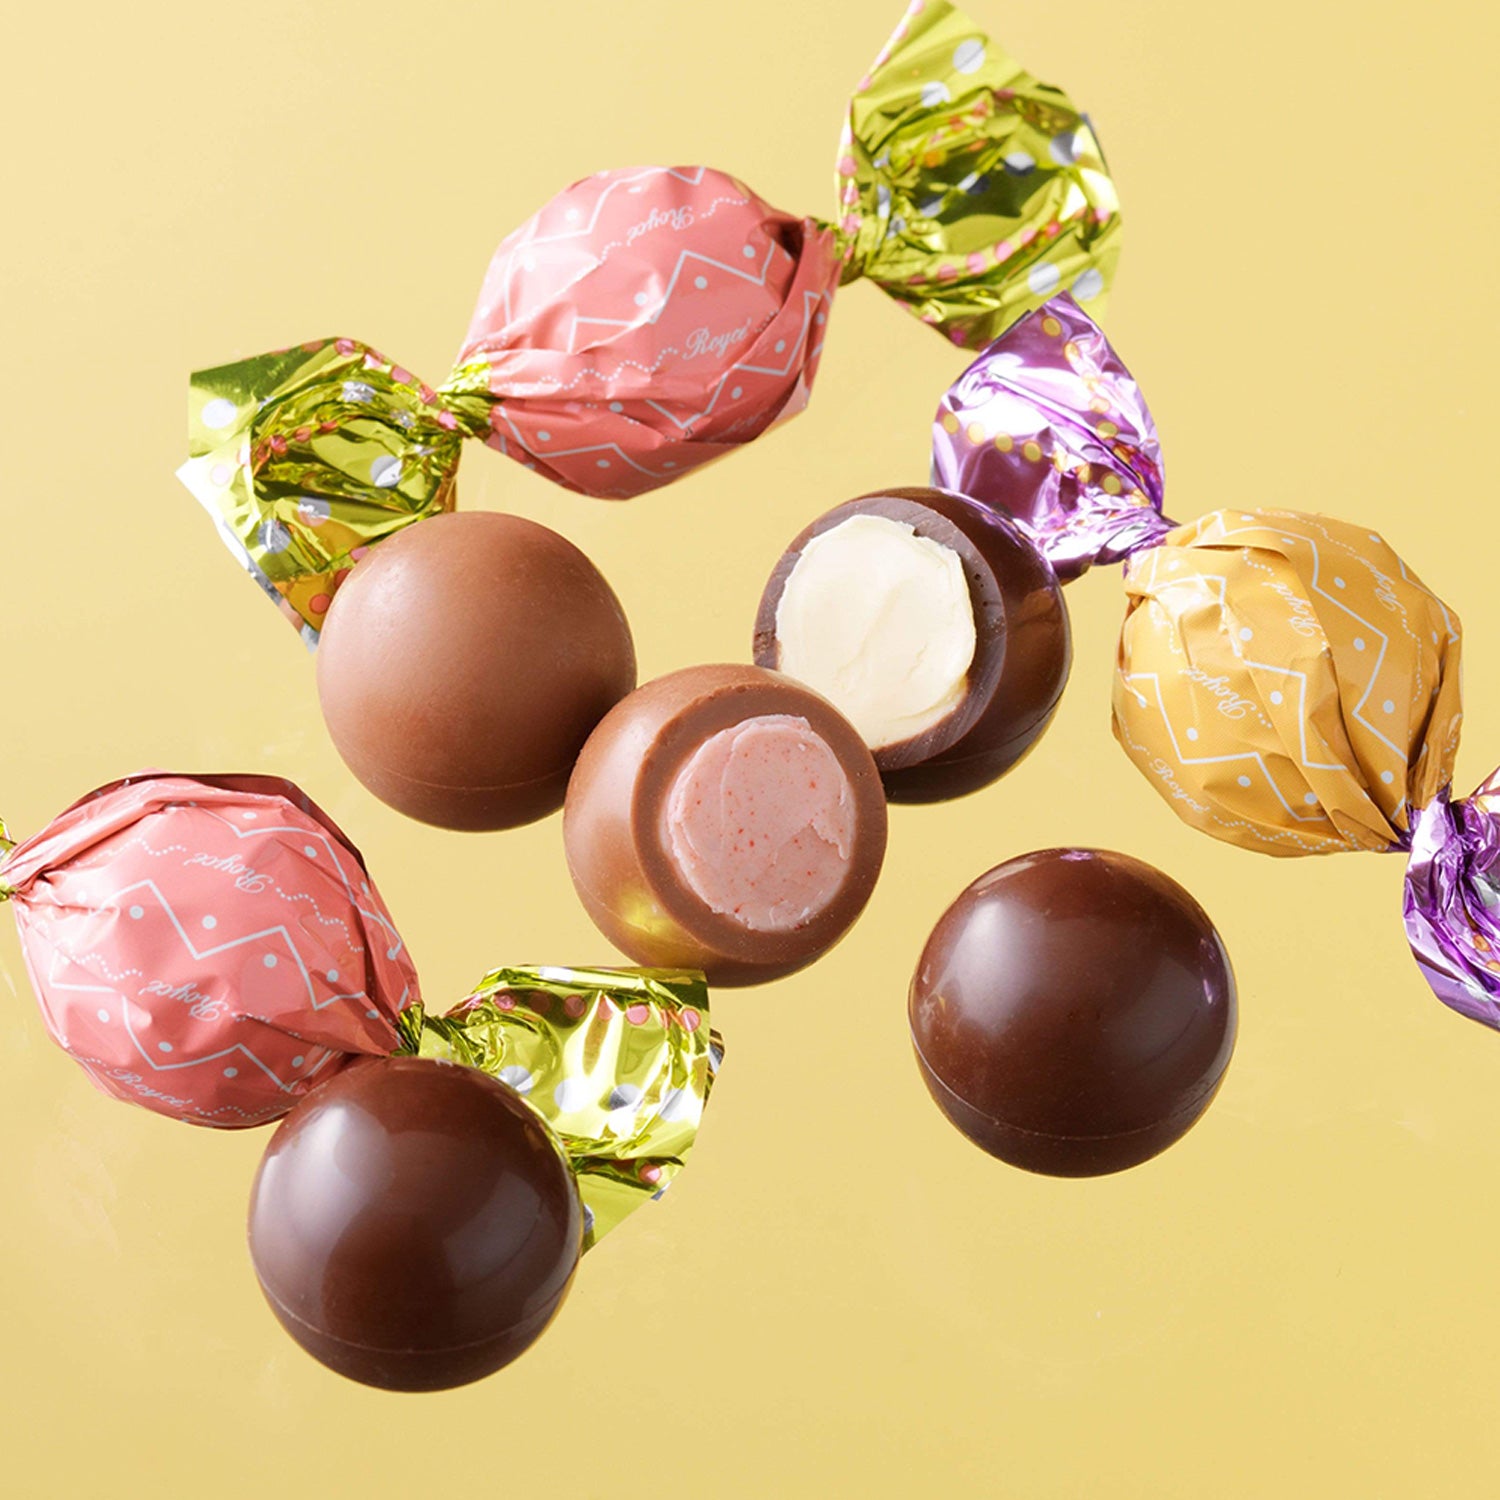 ROYCE' Chocolate - ROYCE' Petit Ball Chocolat "Strawberry & Lemon" - Image shows a variety of round-shaped chocolates in different colors both wrapped and unwrapped with a yellow background. 